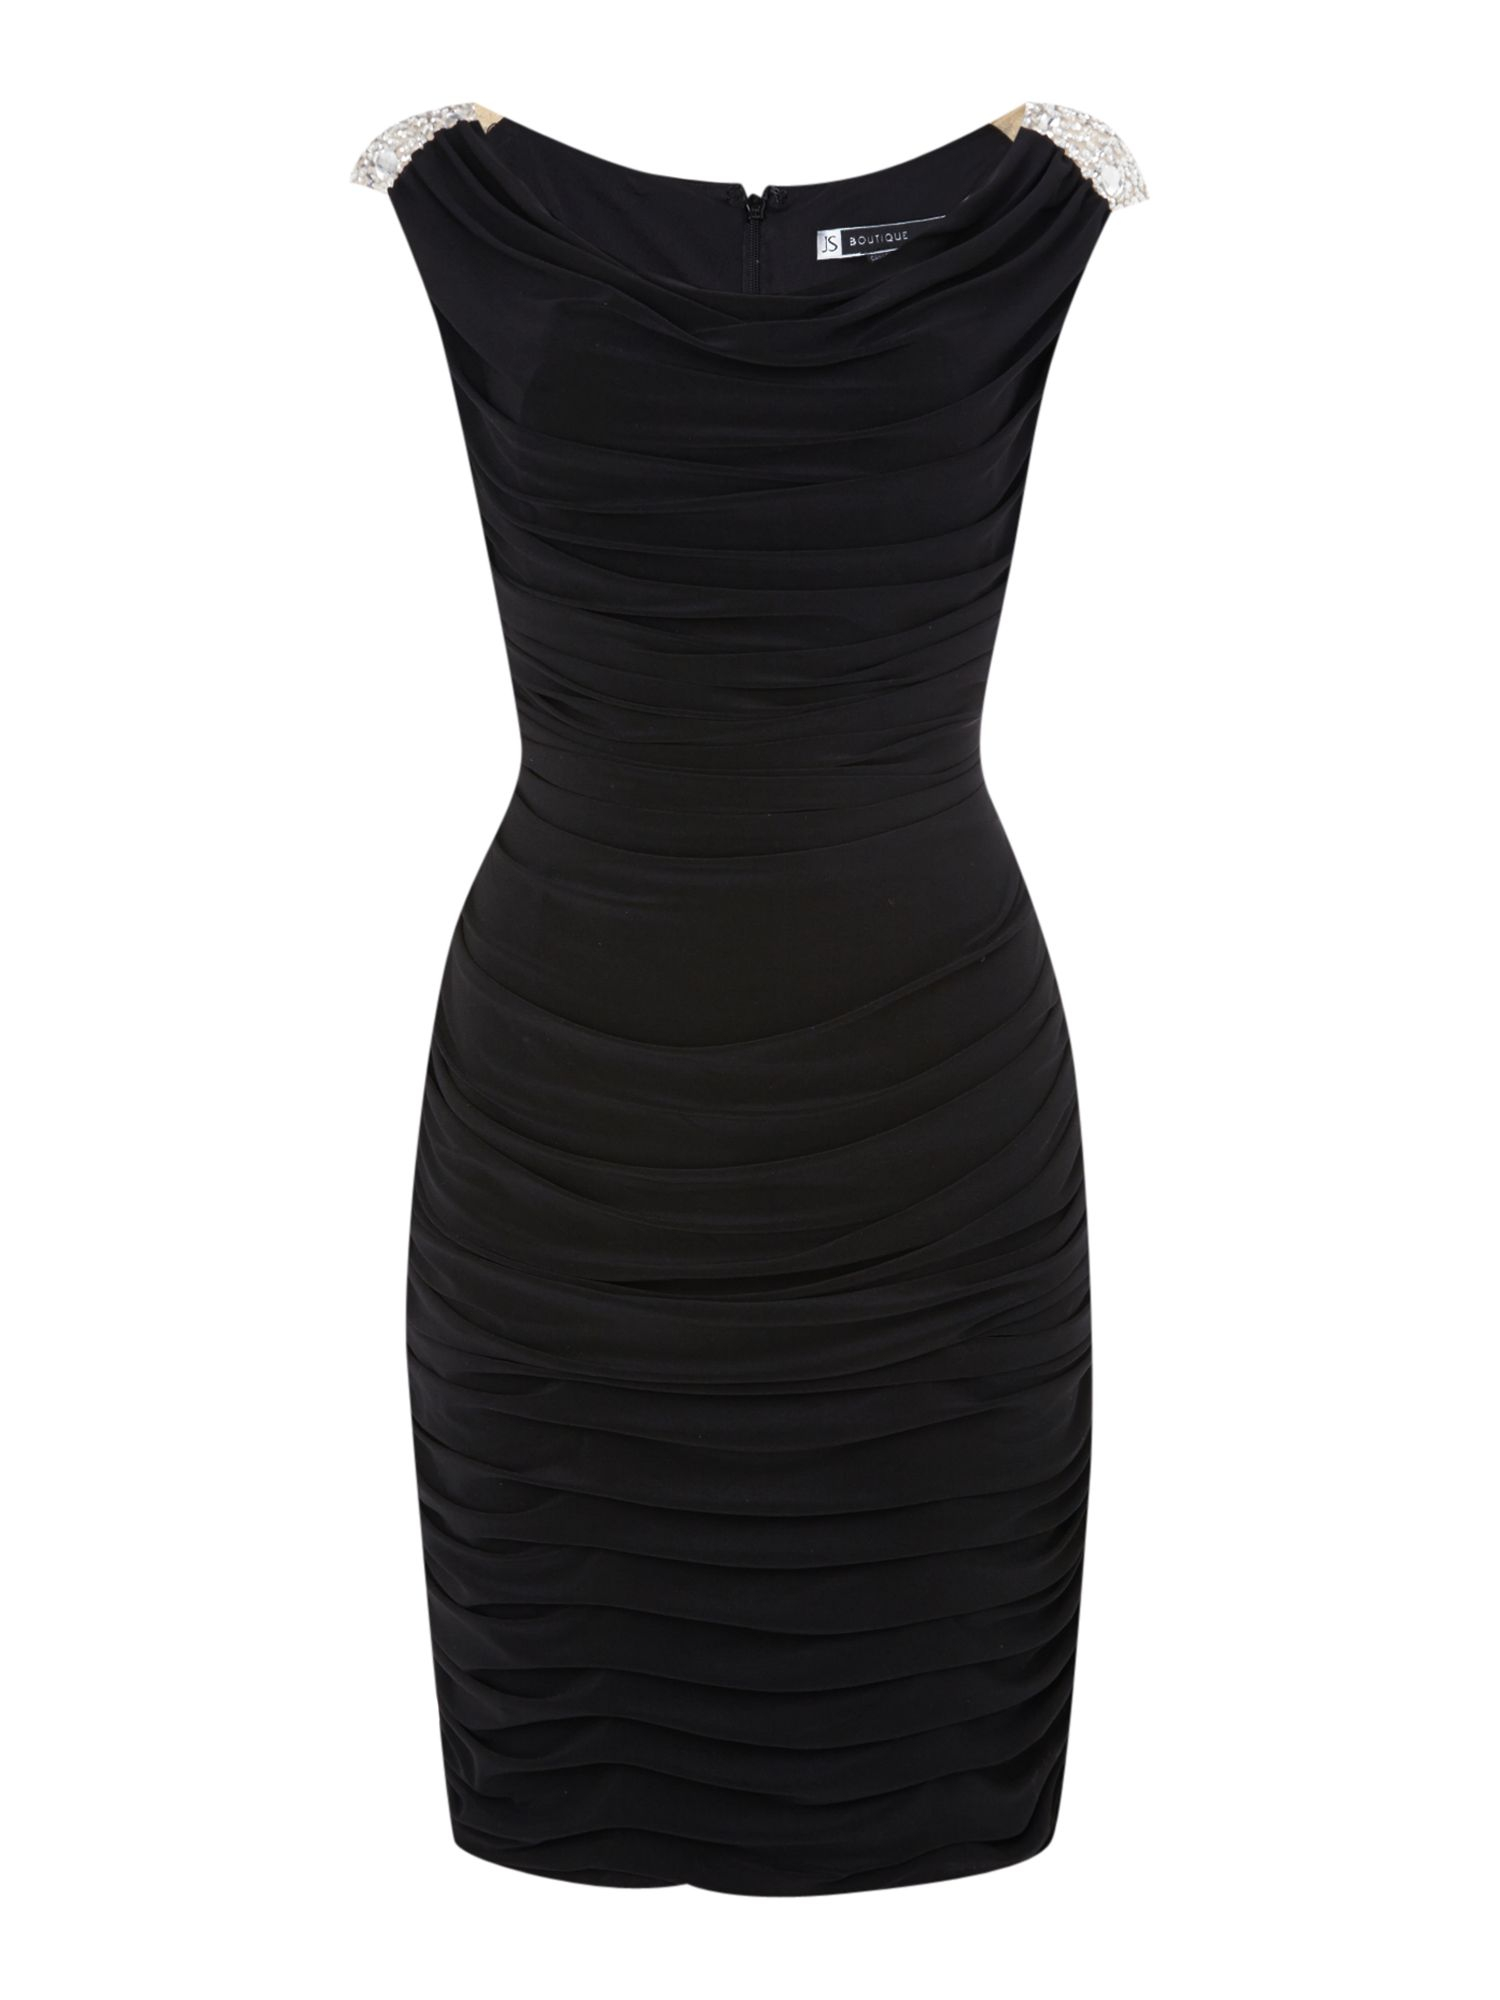 Js collections Rouched Jersey Dress With Embellished Shoulder in Black ...